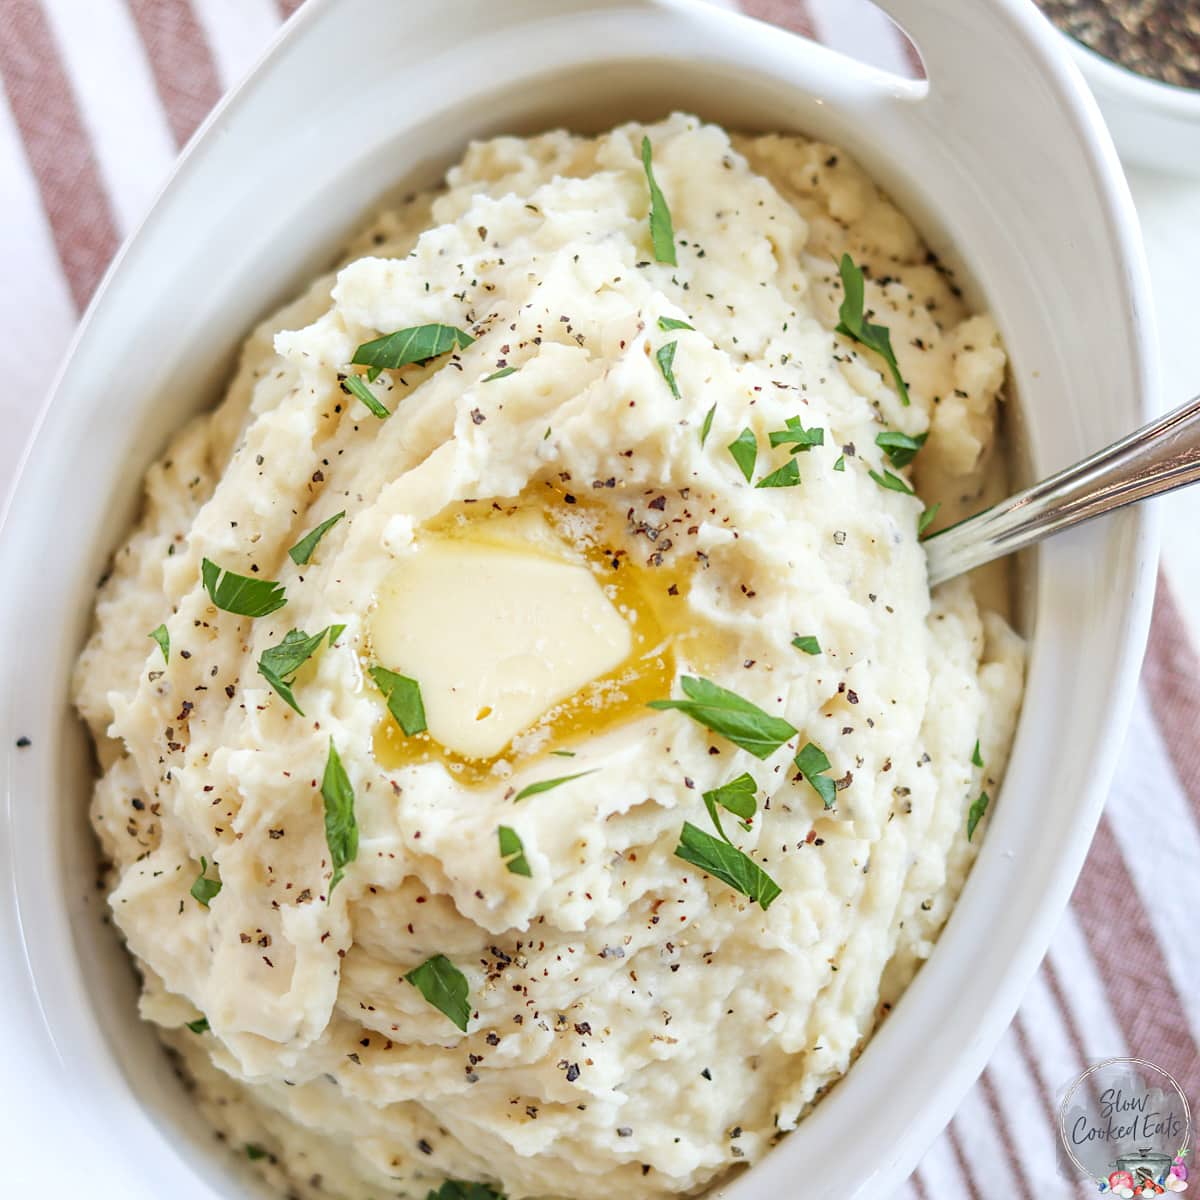 An oval white serving bowl full of crockpot mashed potatoes with melting butter and parsley.